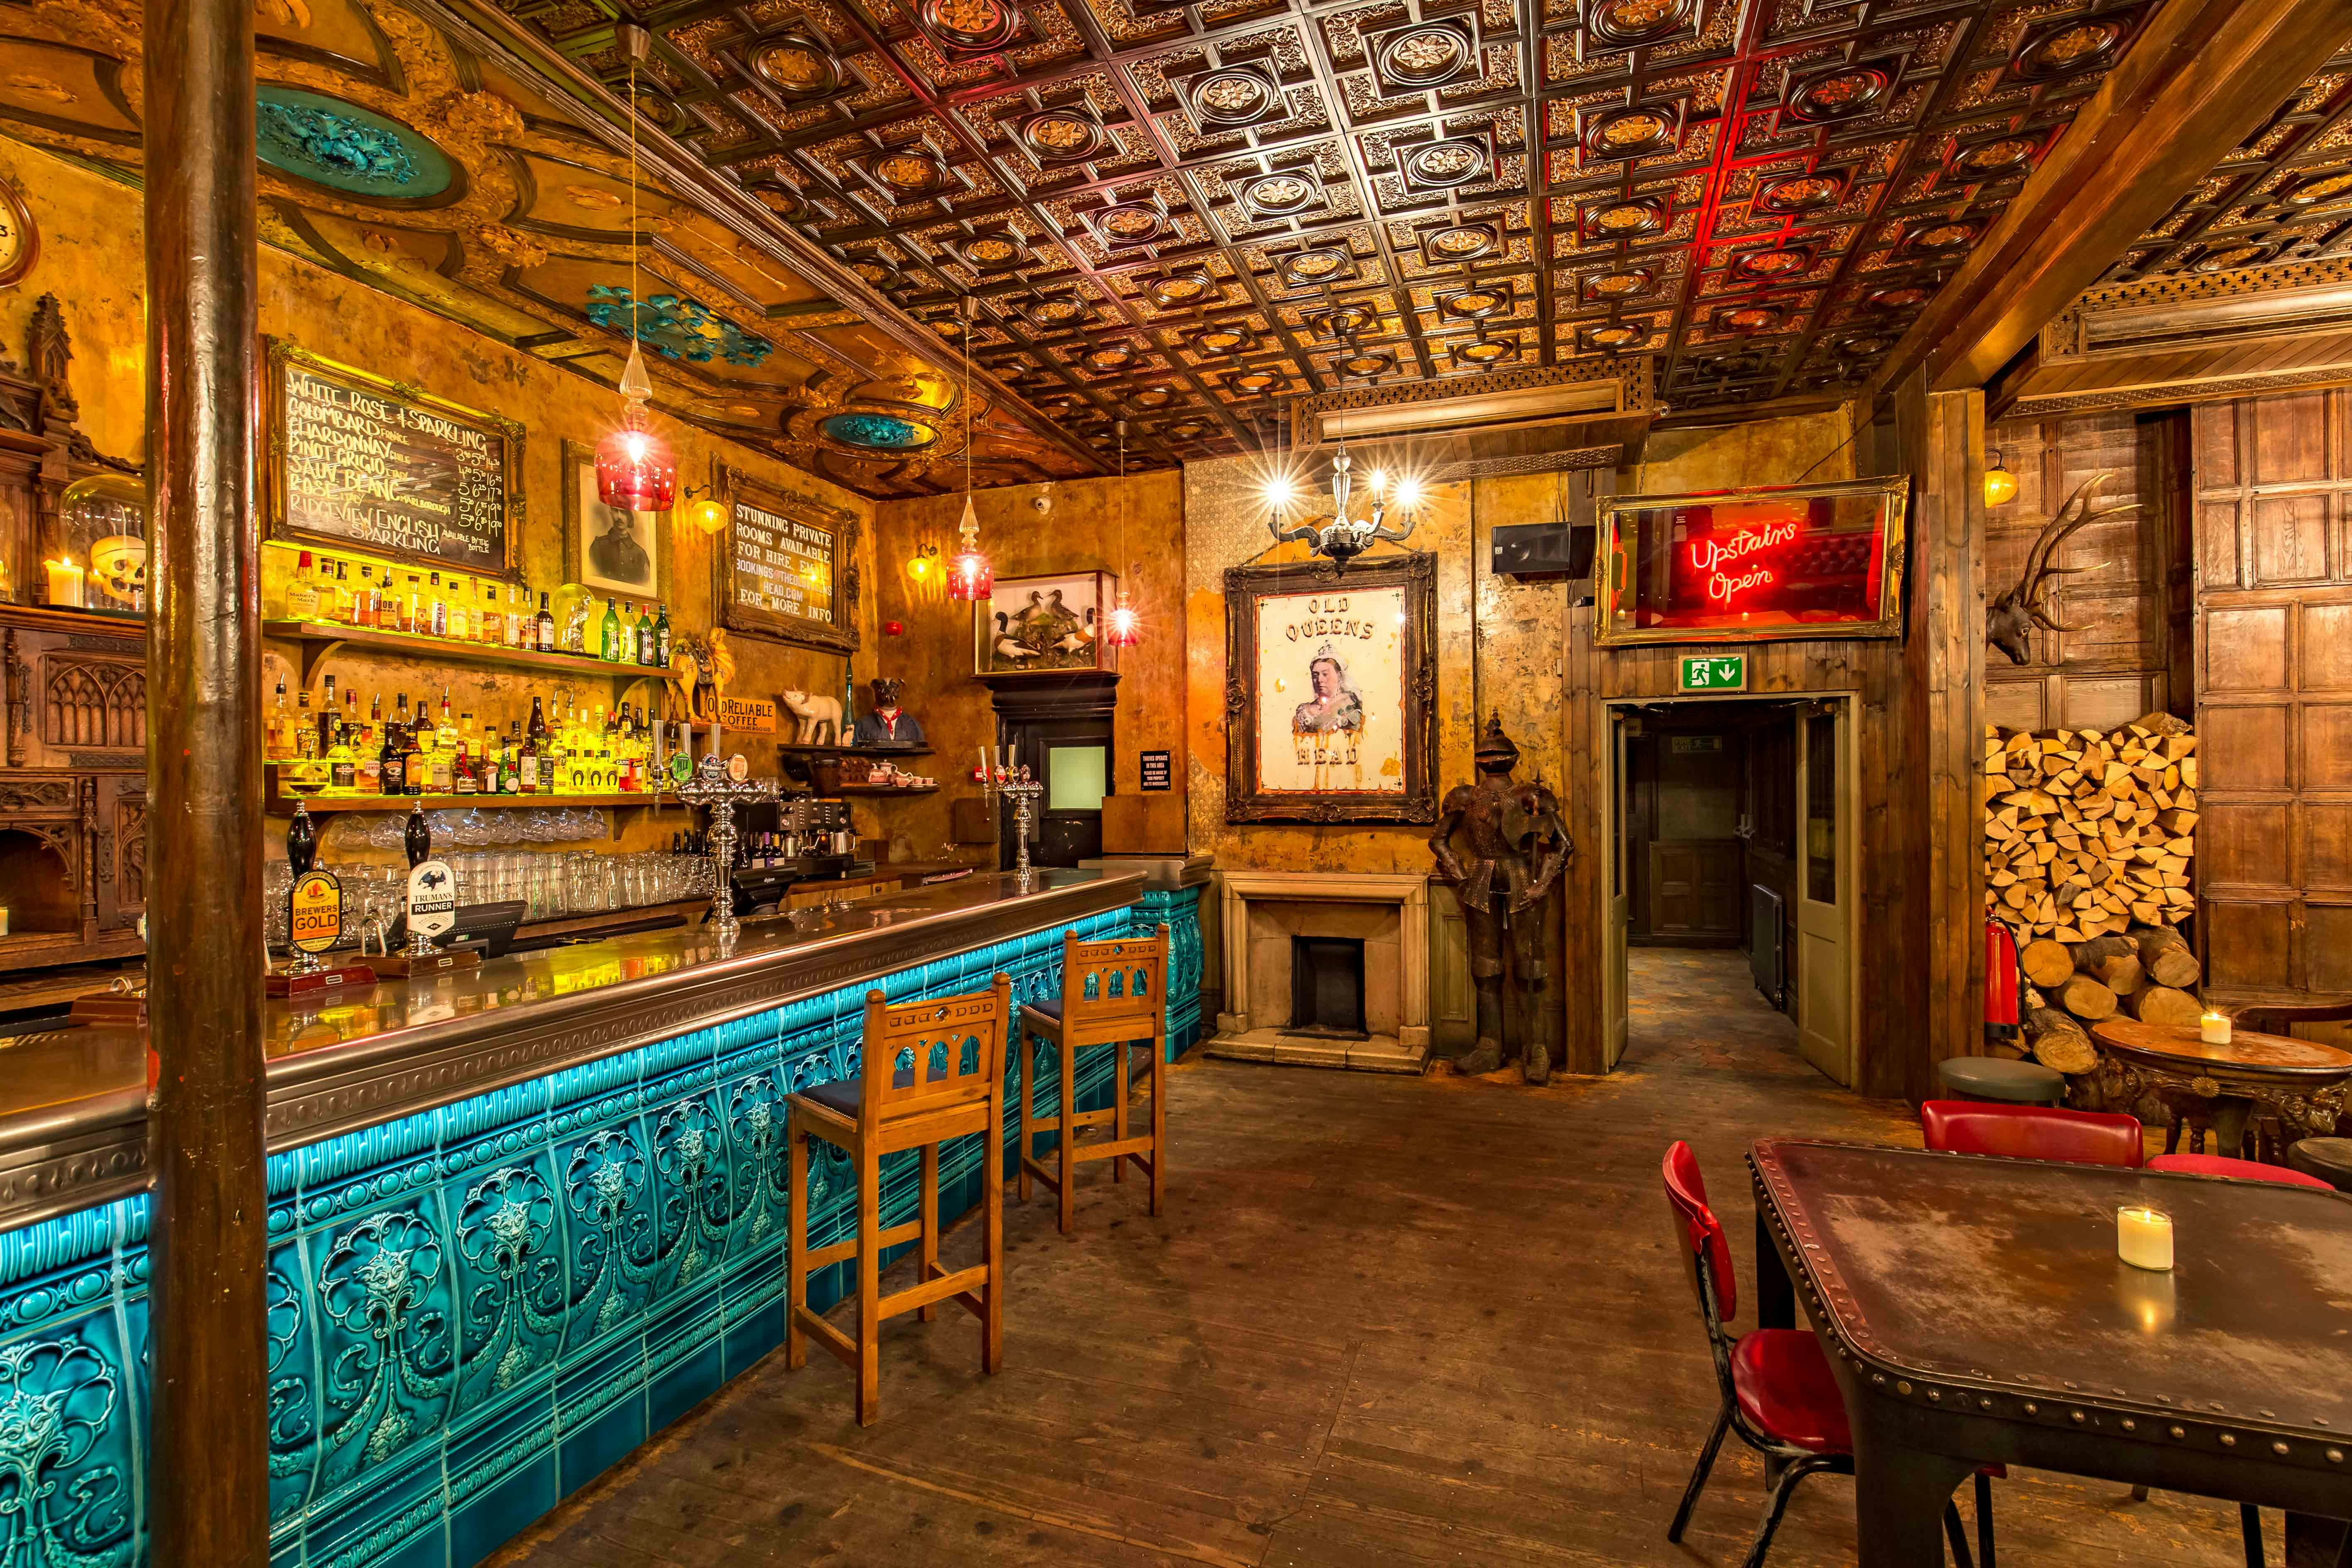 Filming Locations Venues in South London - The Old Queen's Head